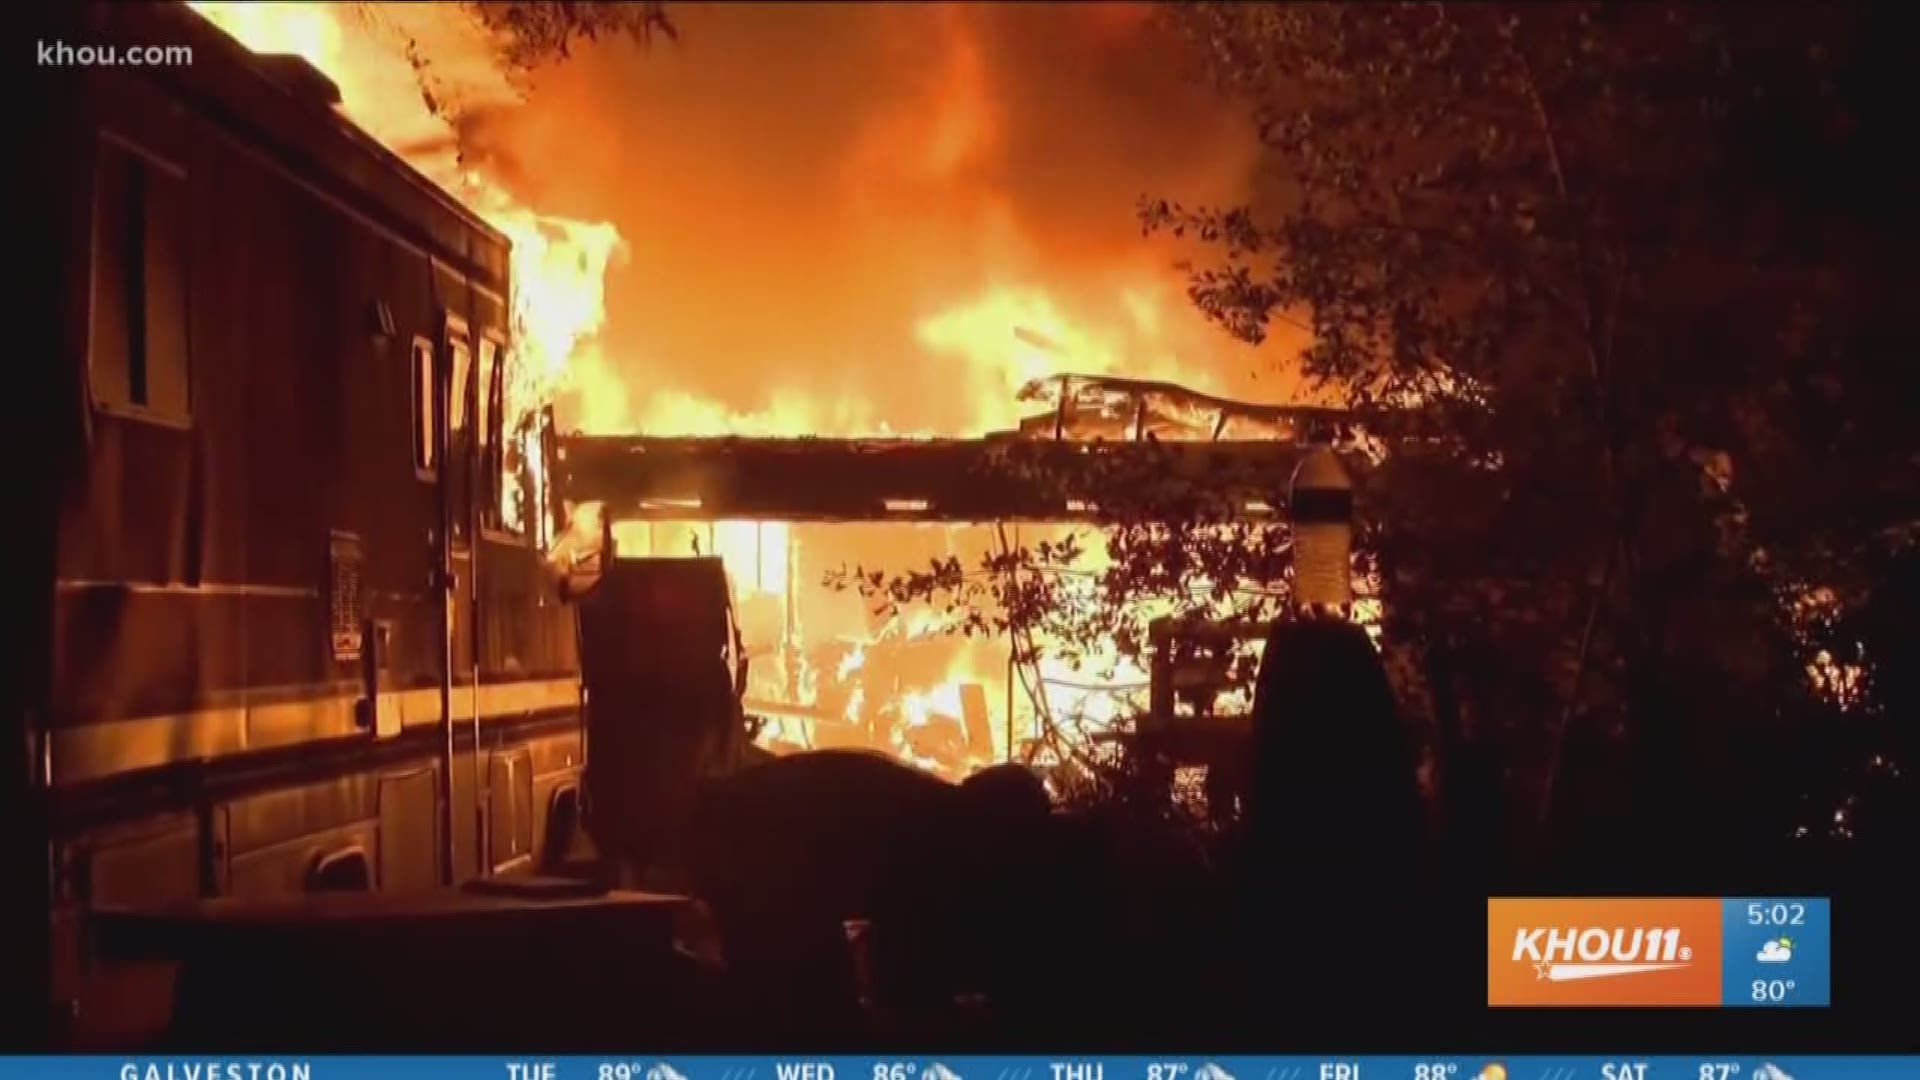 Fire officials are trying to figure out how a house fire started in a northwest Harris County neighborhood overnight.